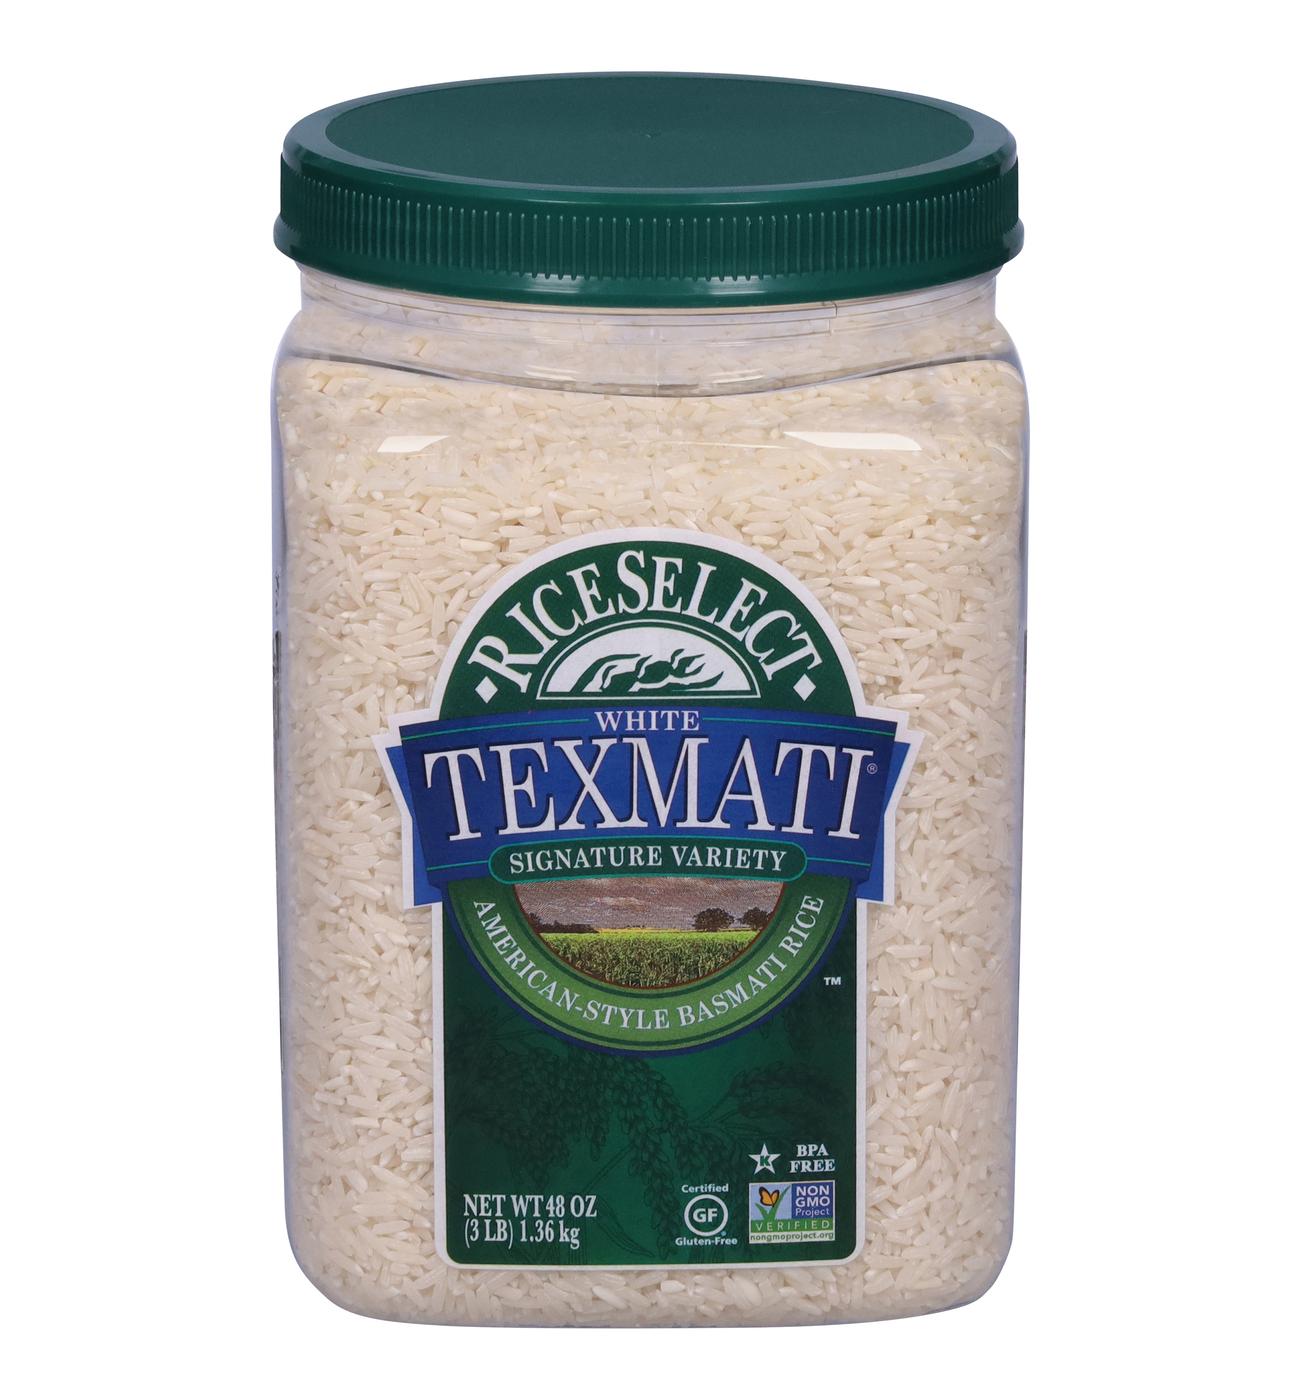 RiceSelect Texmati Rice; image 1 of 6